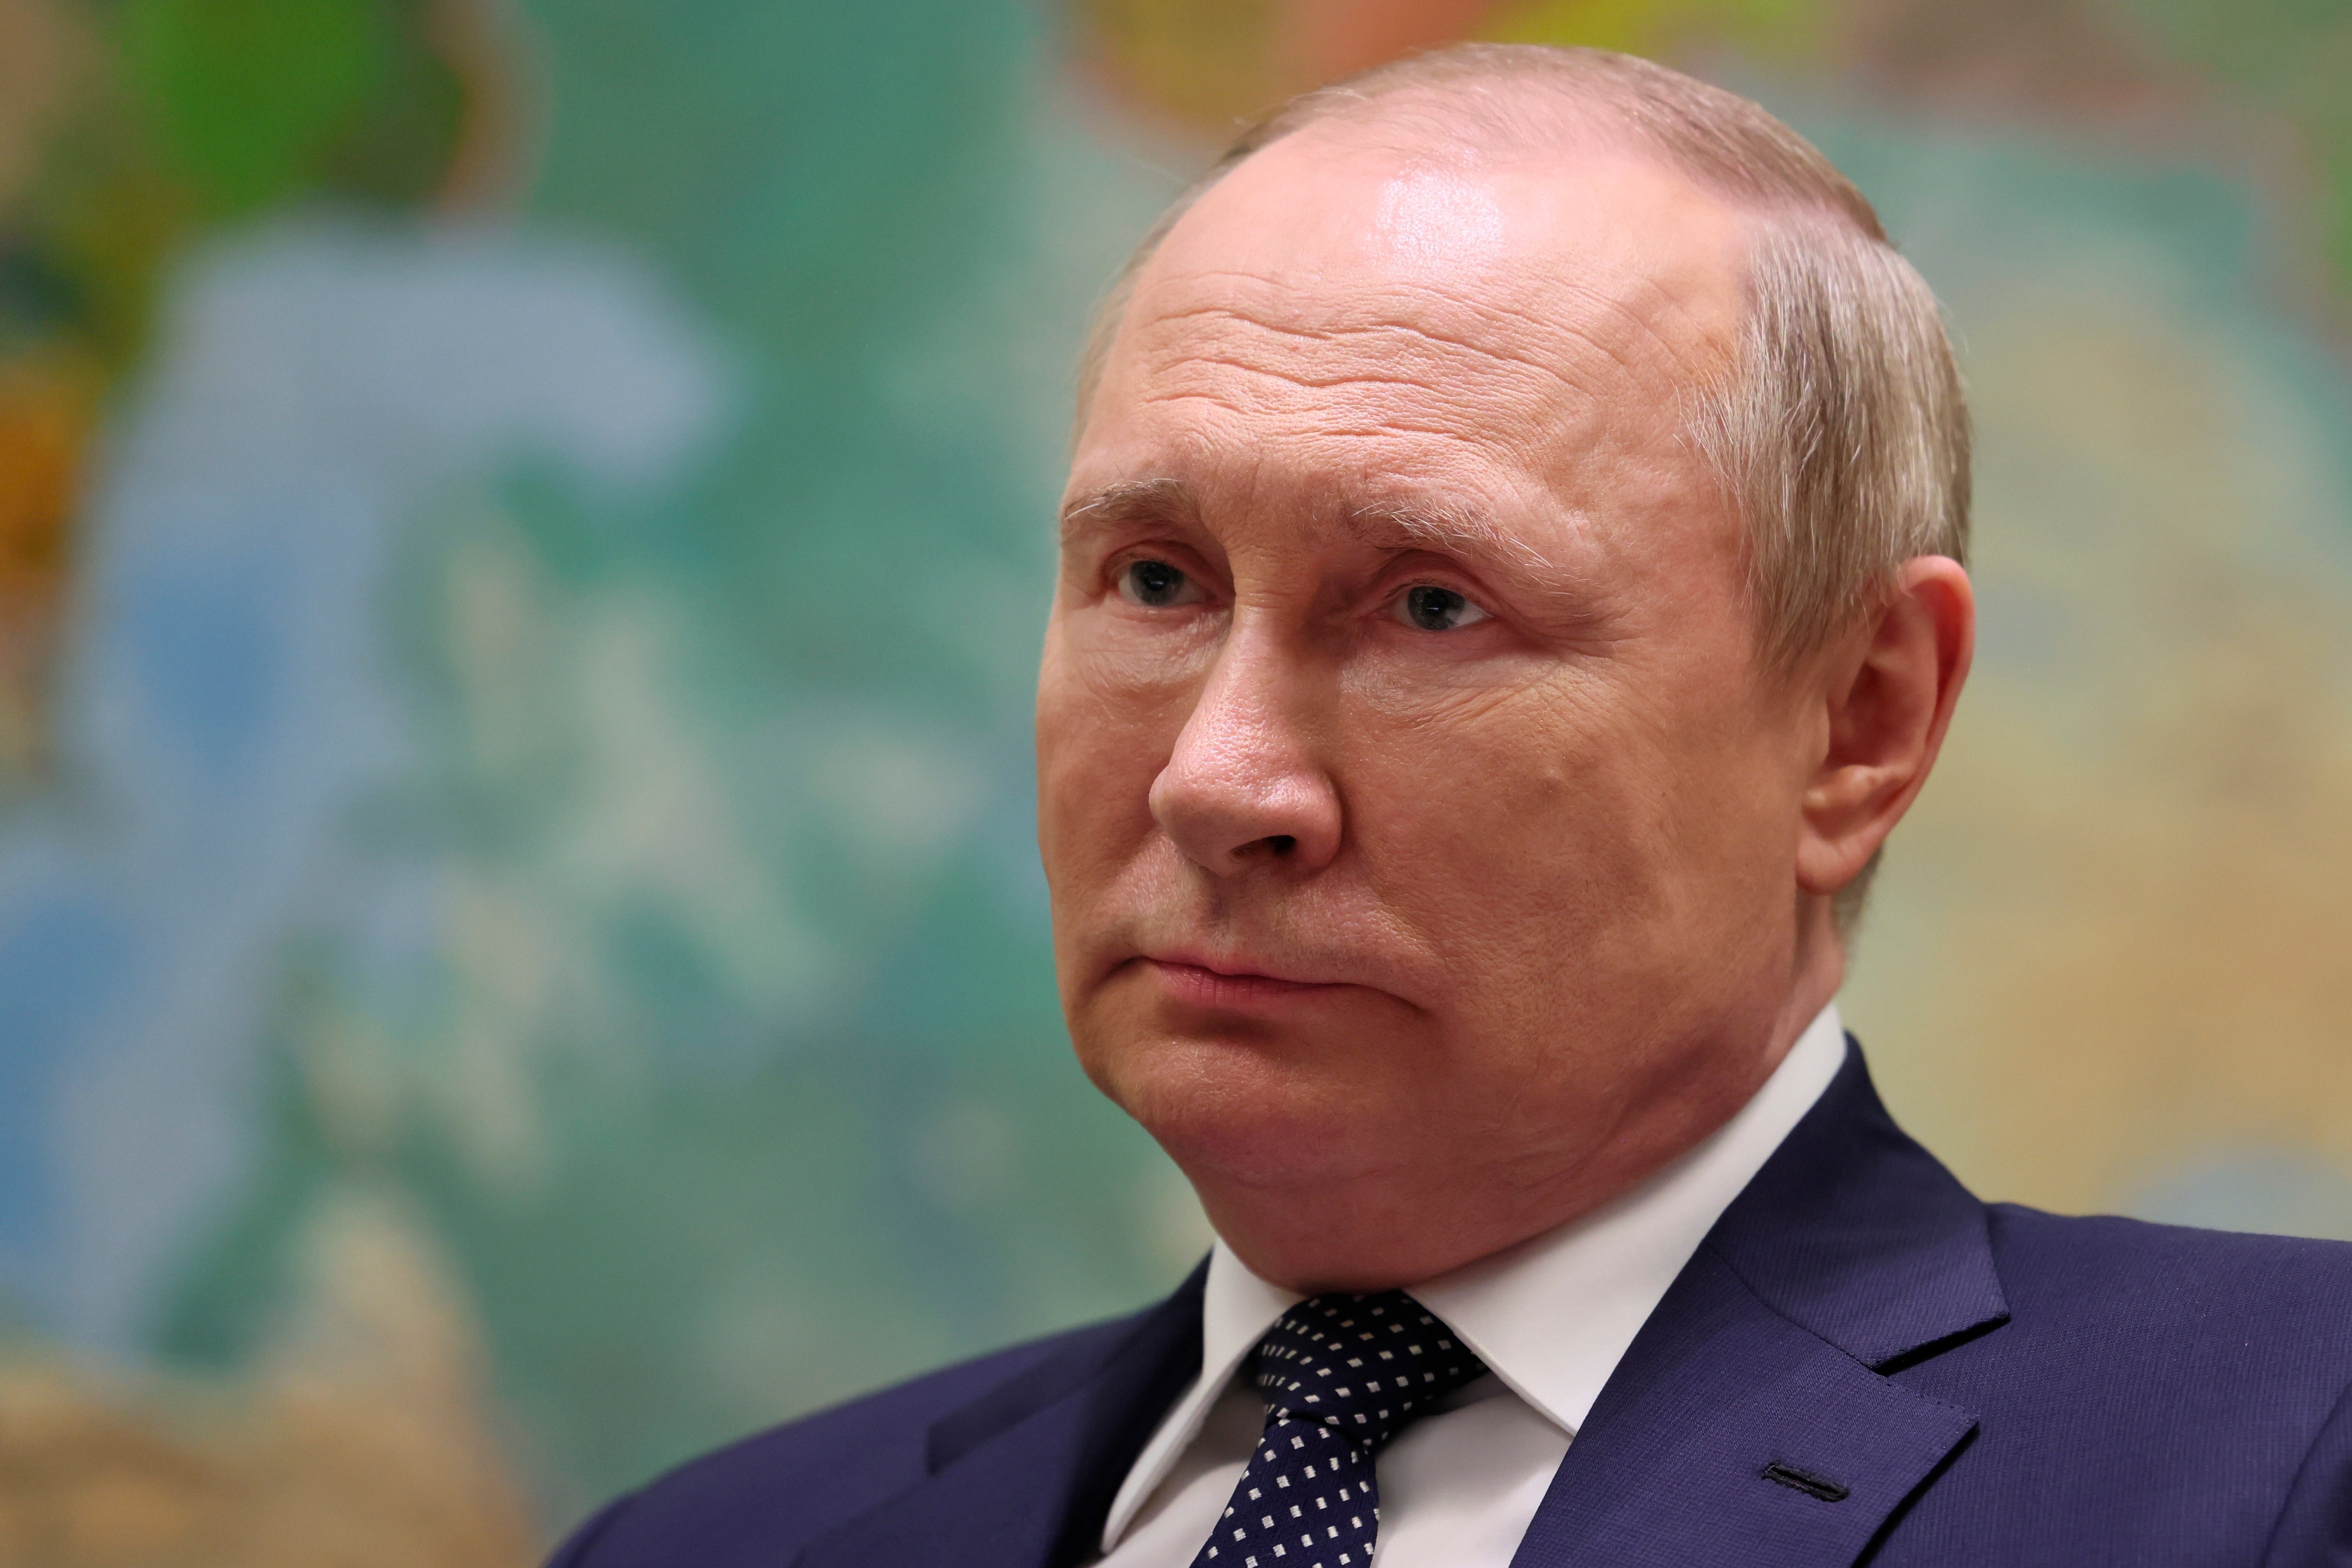 It would be a timely demonstration of western frustration with Putin’s intransigence